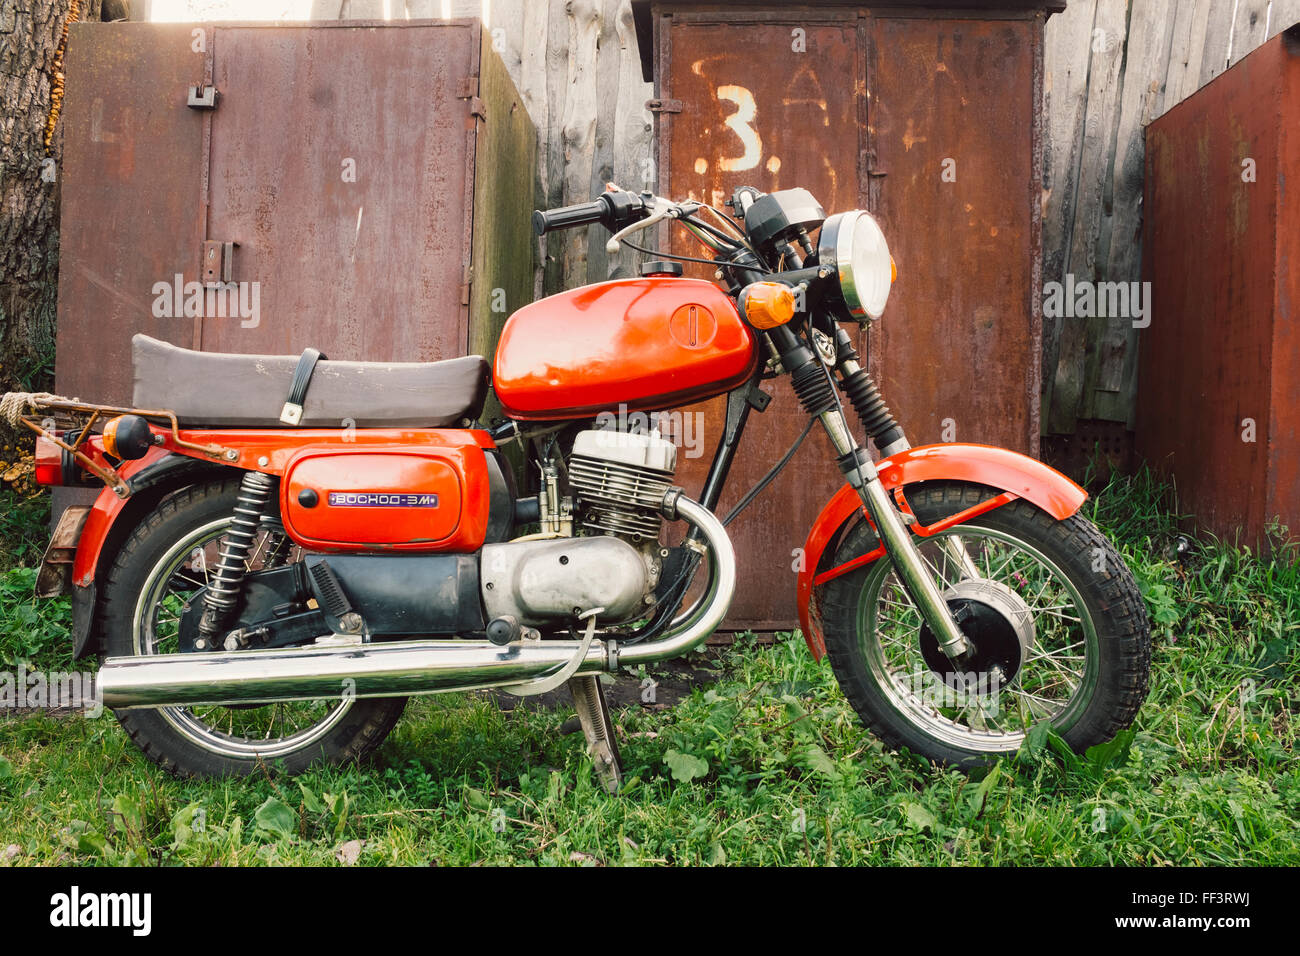 MINSK, BELARUS - SEPTEMBER 22, 2013: Old Red Russian (Soviet) Motorcycle  'Voshod' Parked On Green Grass Yard. This motorcycles Stock Photo